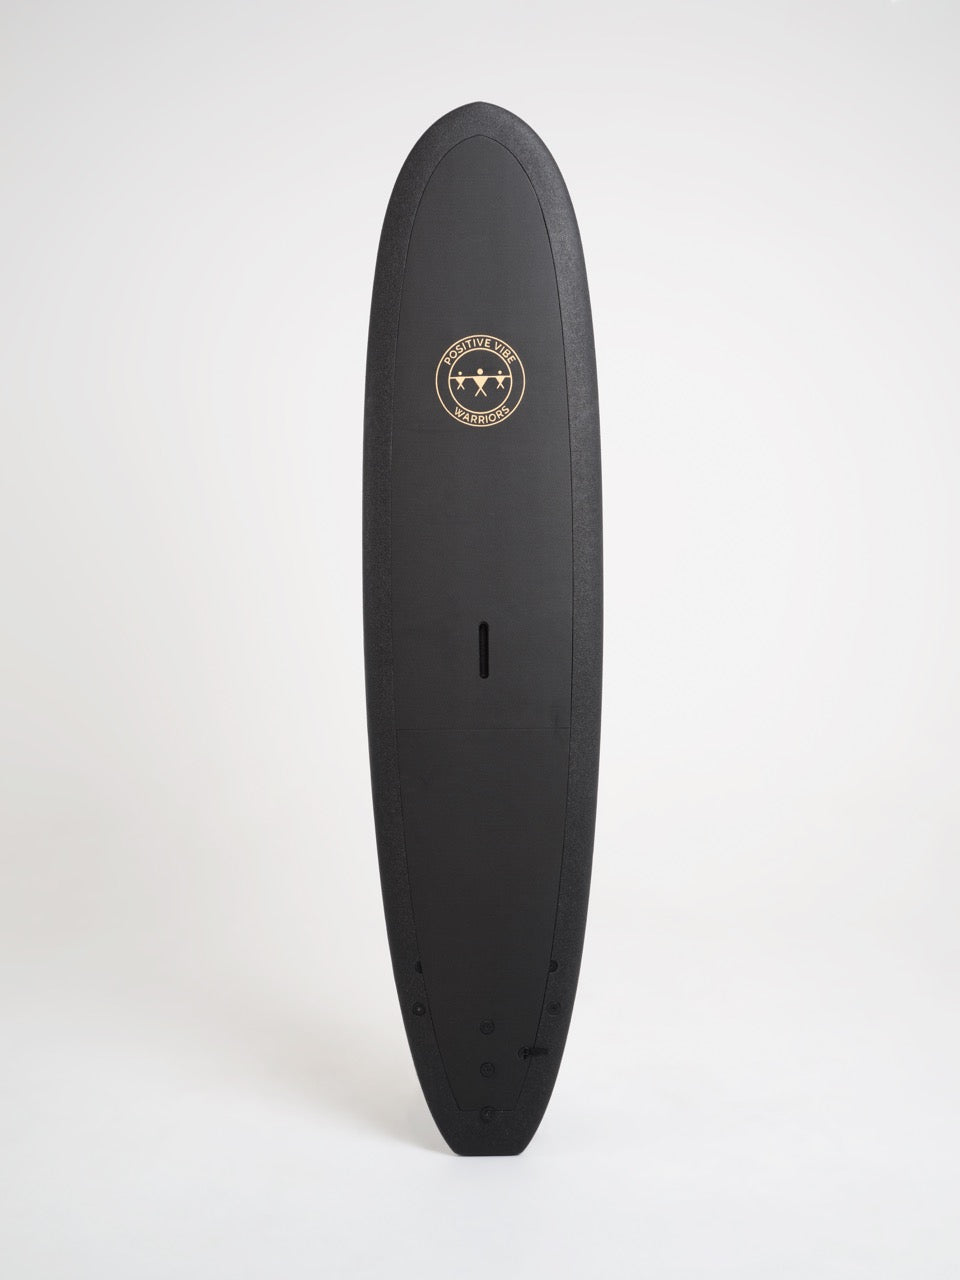 A black 8 foot Positive Vibe Warriors Scout surfboard with a logo on a white background